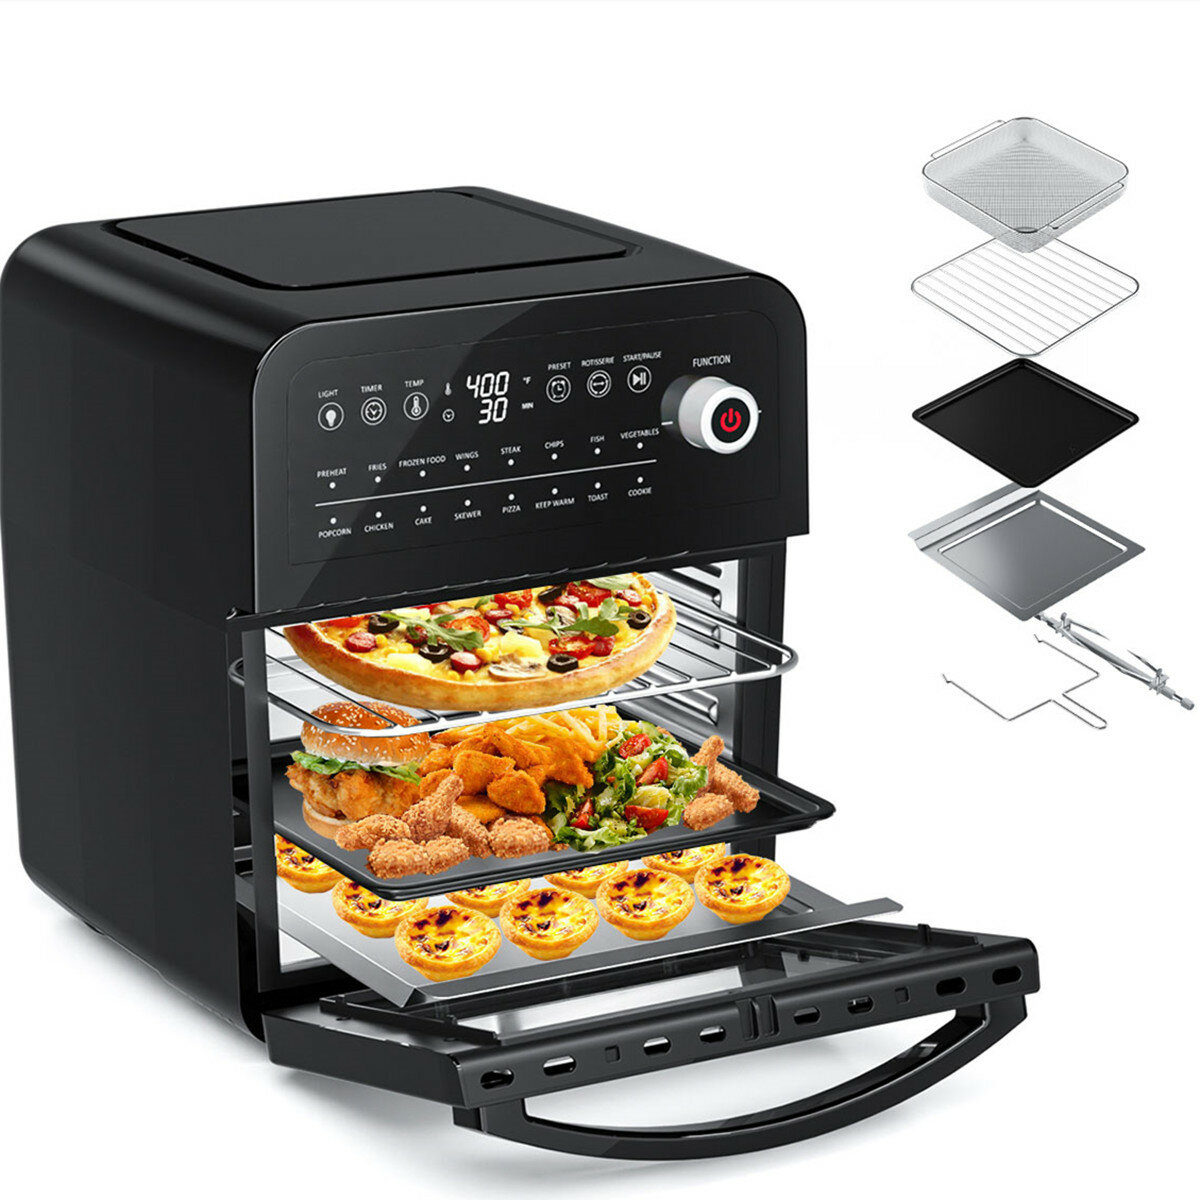 

OSMOND 16 in 1 Air Fryer Toaster Ovens 12L 12 6QT Convection Oven with LCD 5 Accessories for Airfryer Broil Baking Cooki